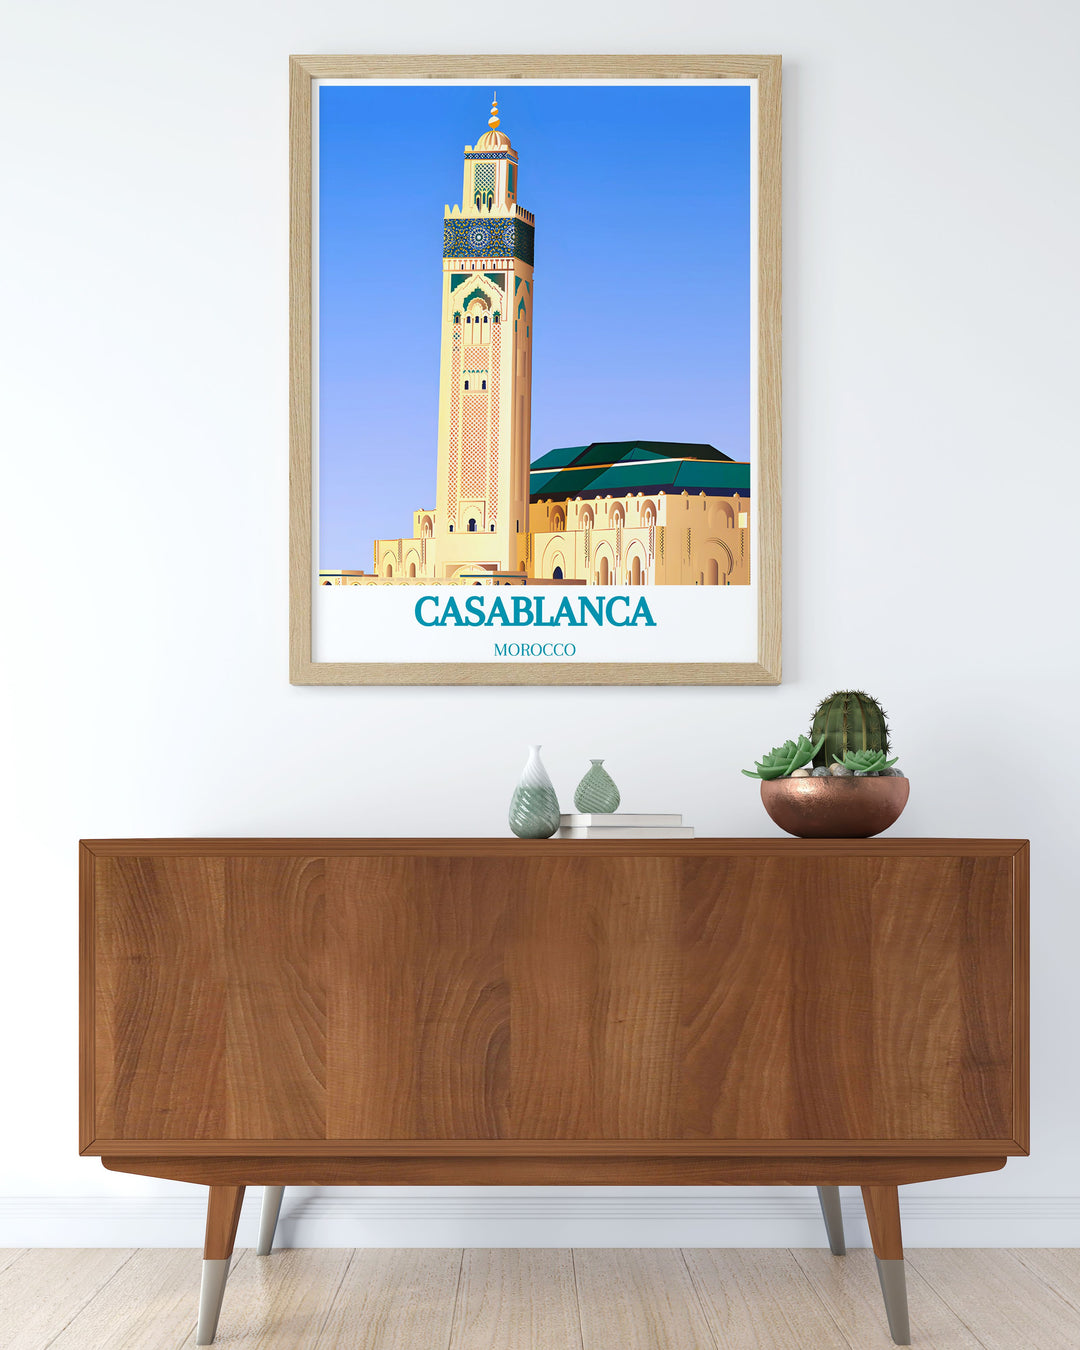 Artistic depiction of Casablanca’s vibrant streets and historical buildings in a high-quality print, great for cultural enthusiasts.